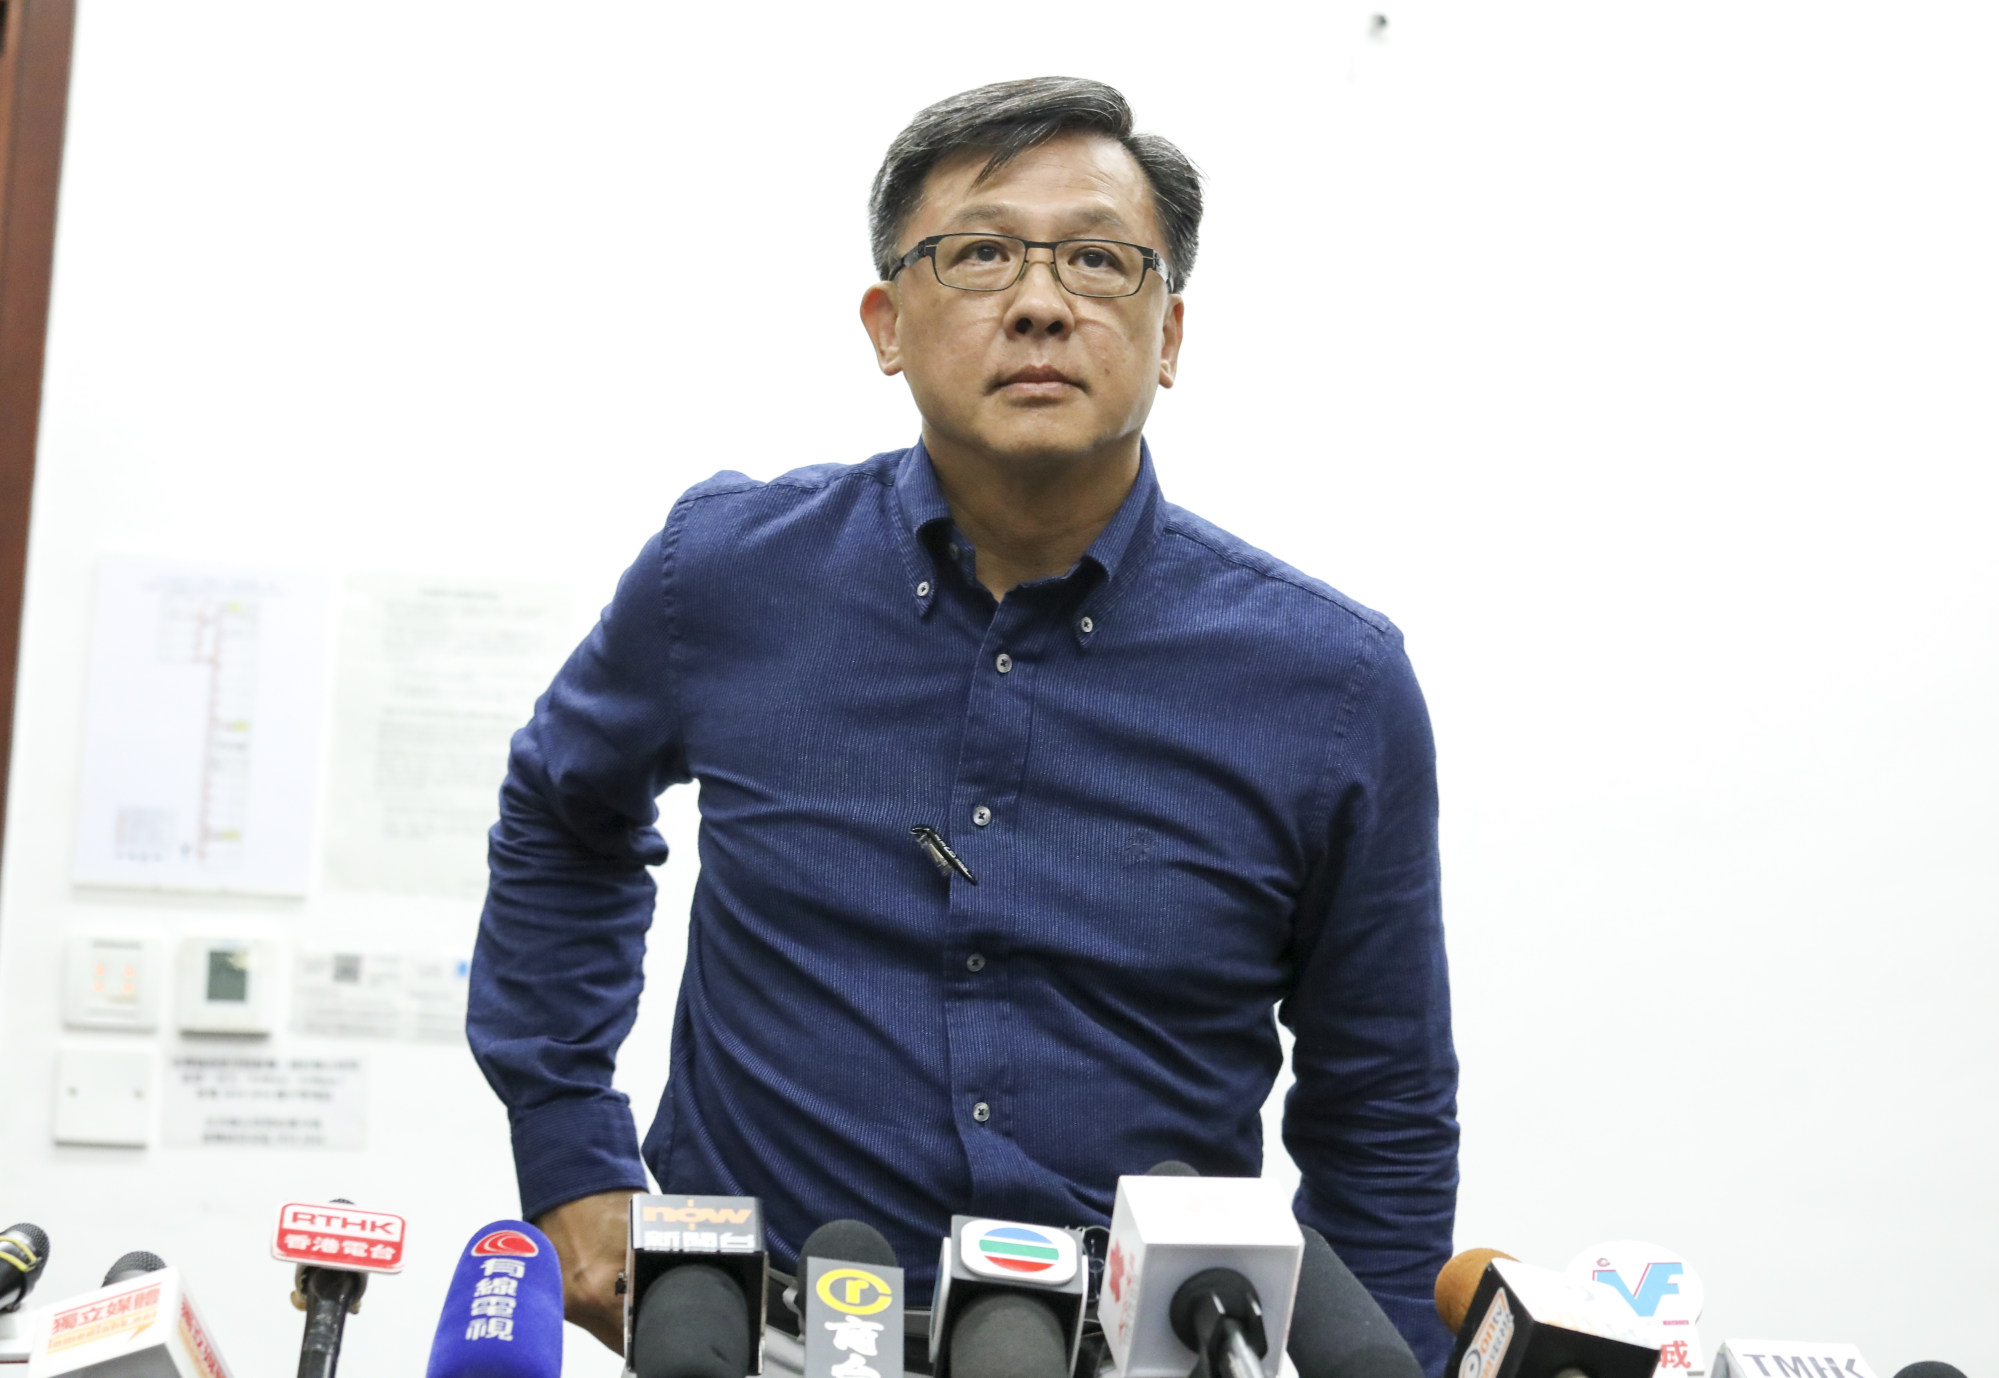 Outspoken lawmaker Junius Ho had earlier condemned the rugby players for not reacting. Photo: Nora Tam